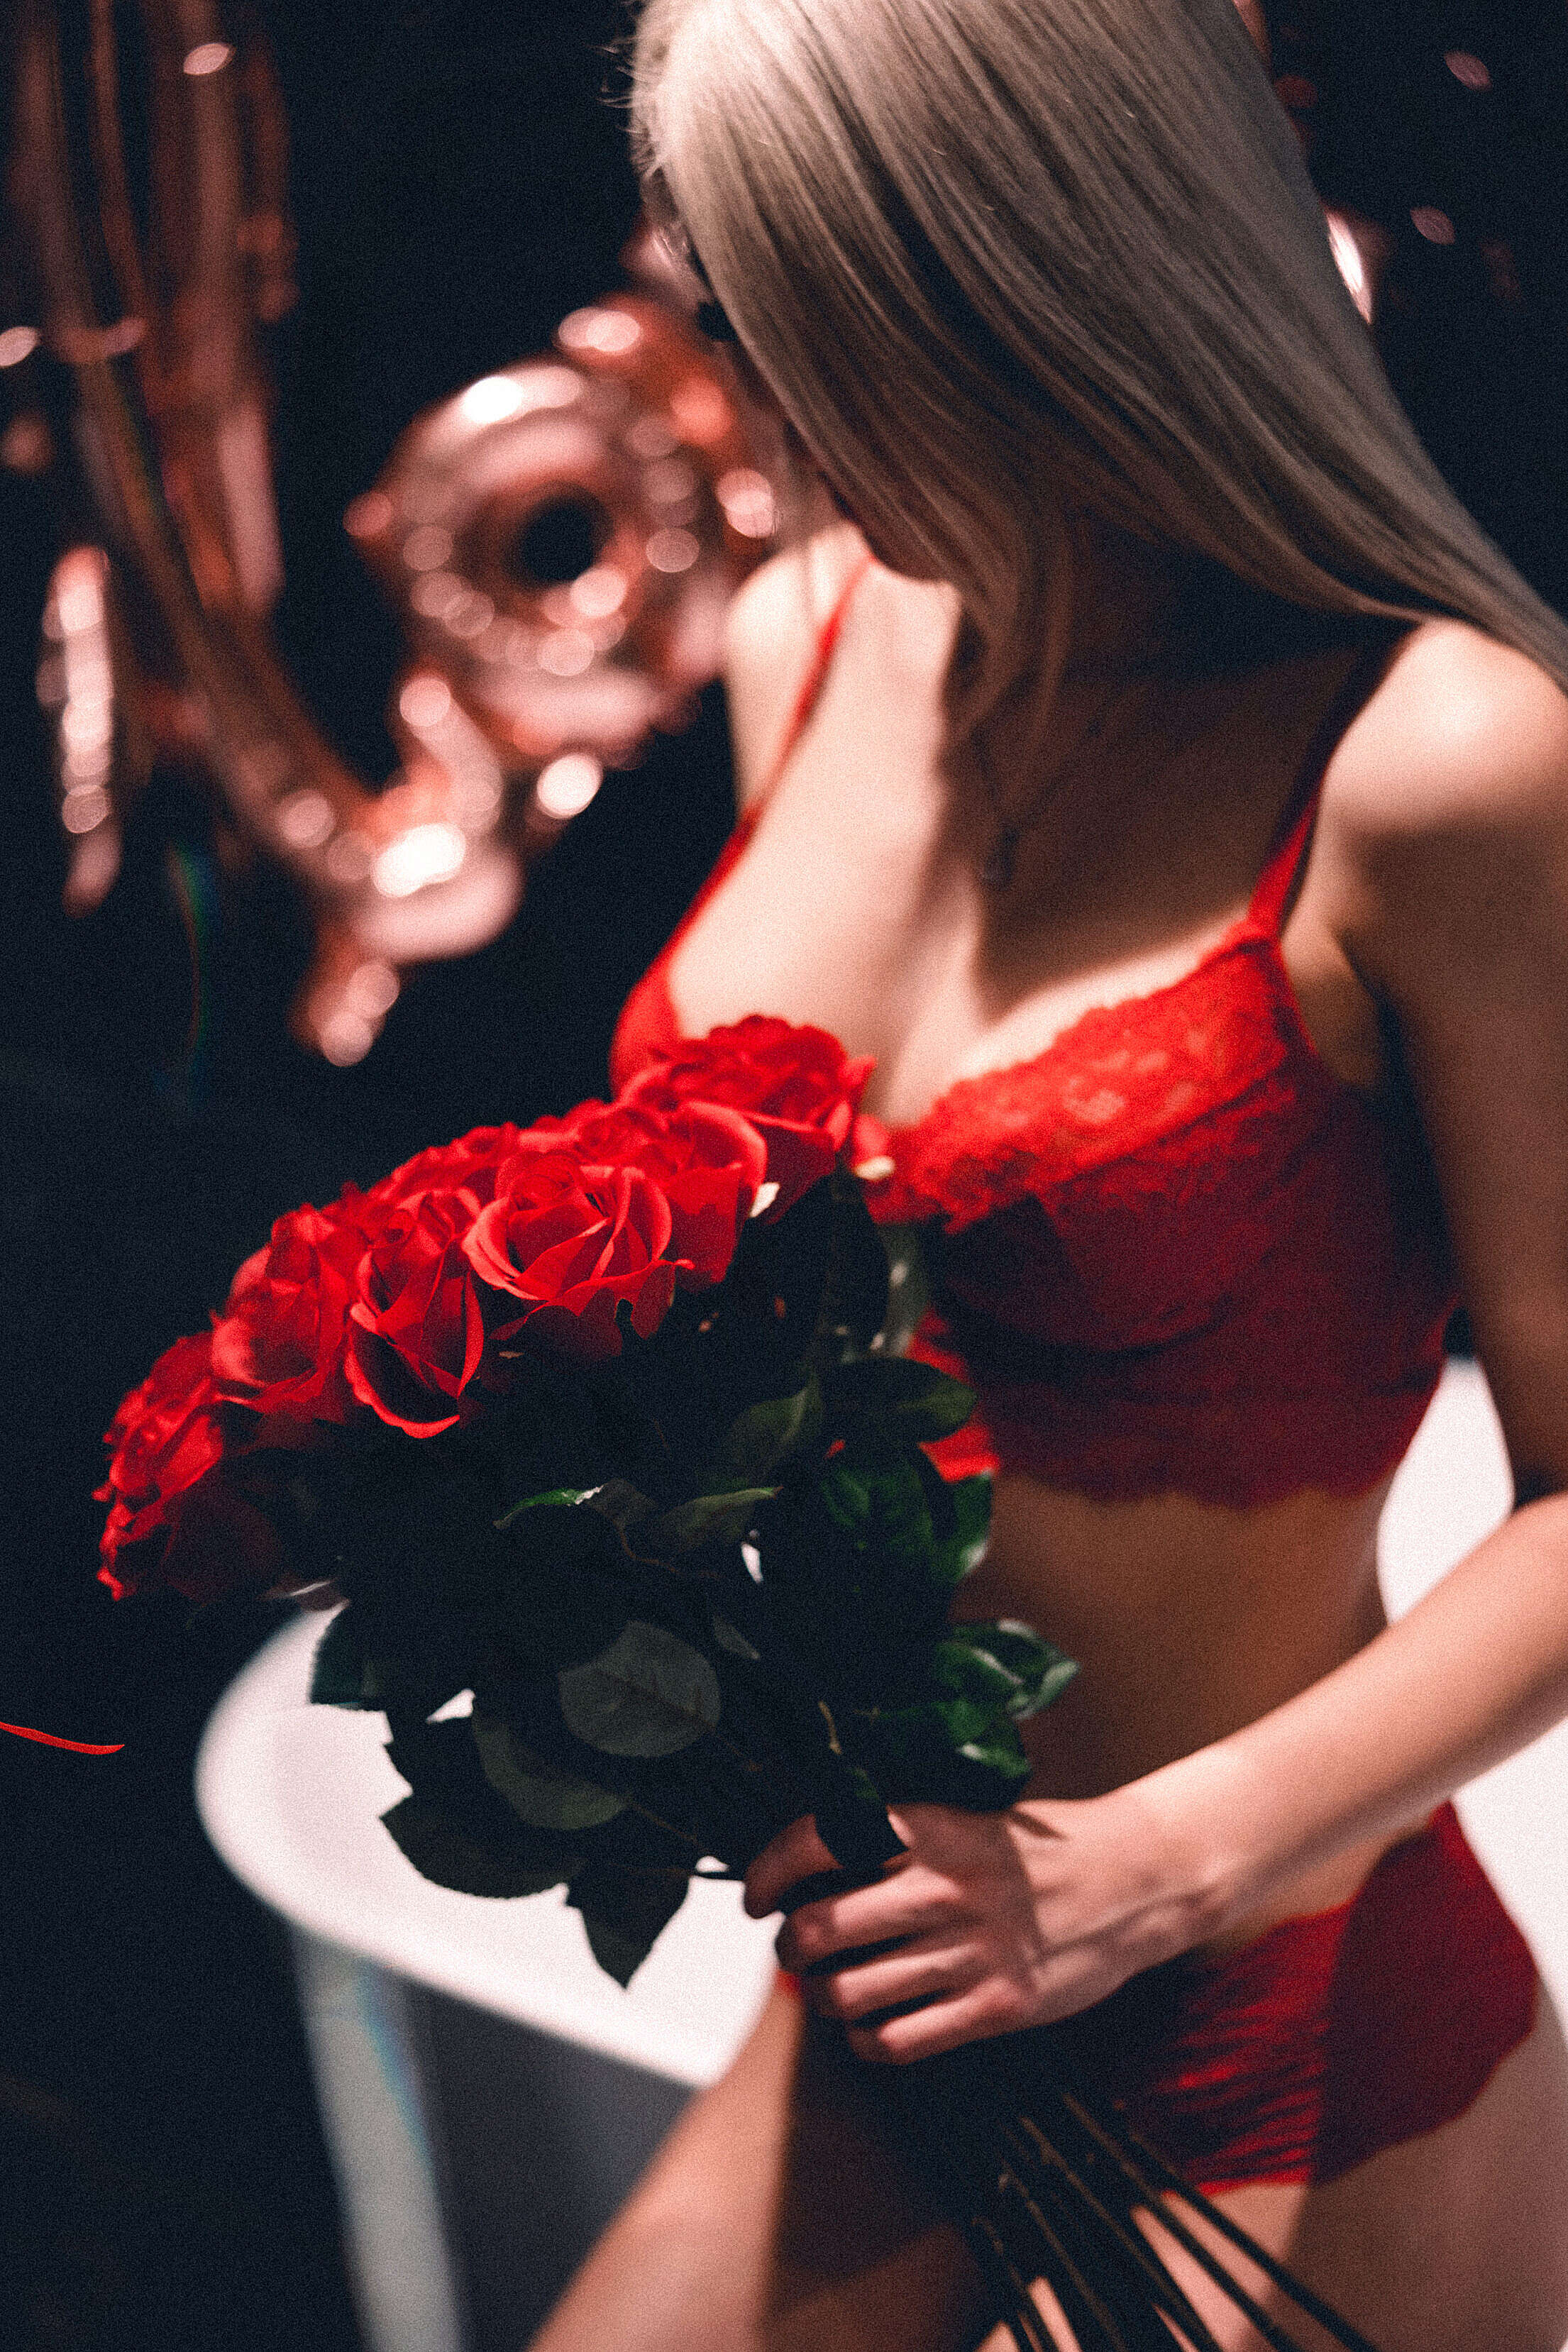 Woman in Red Lace Lingerie Holding a Bouquet of Roses Free Stock Photo